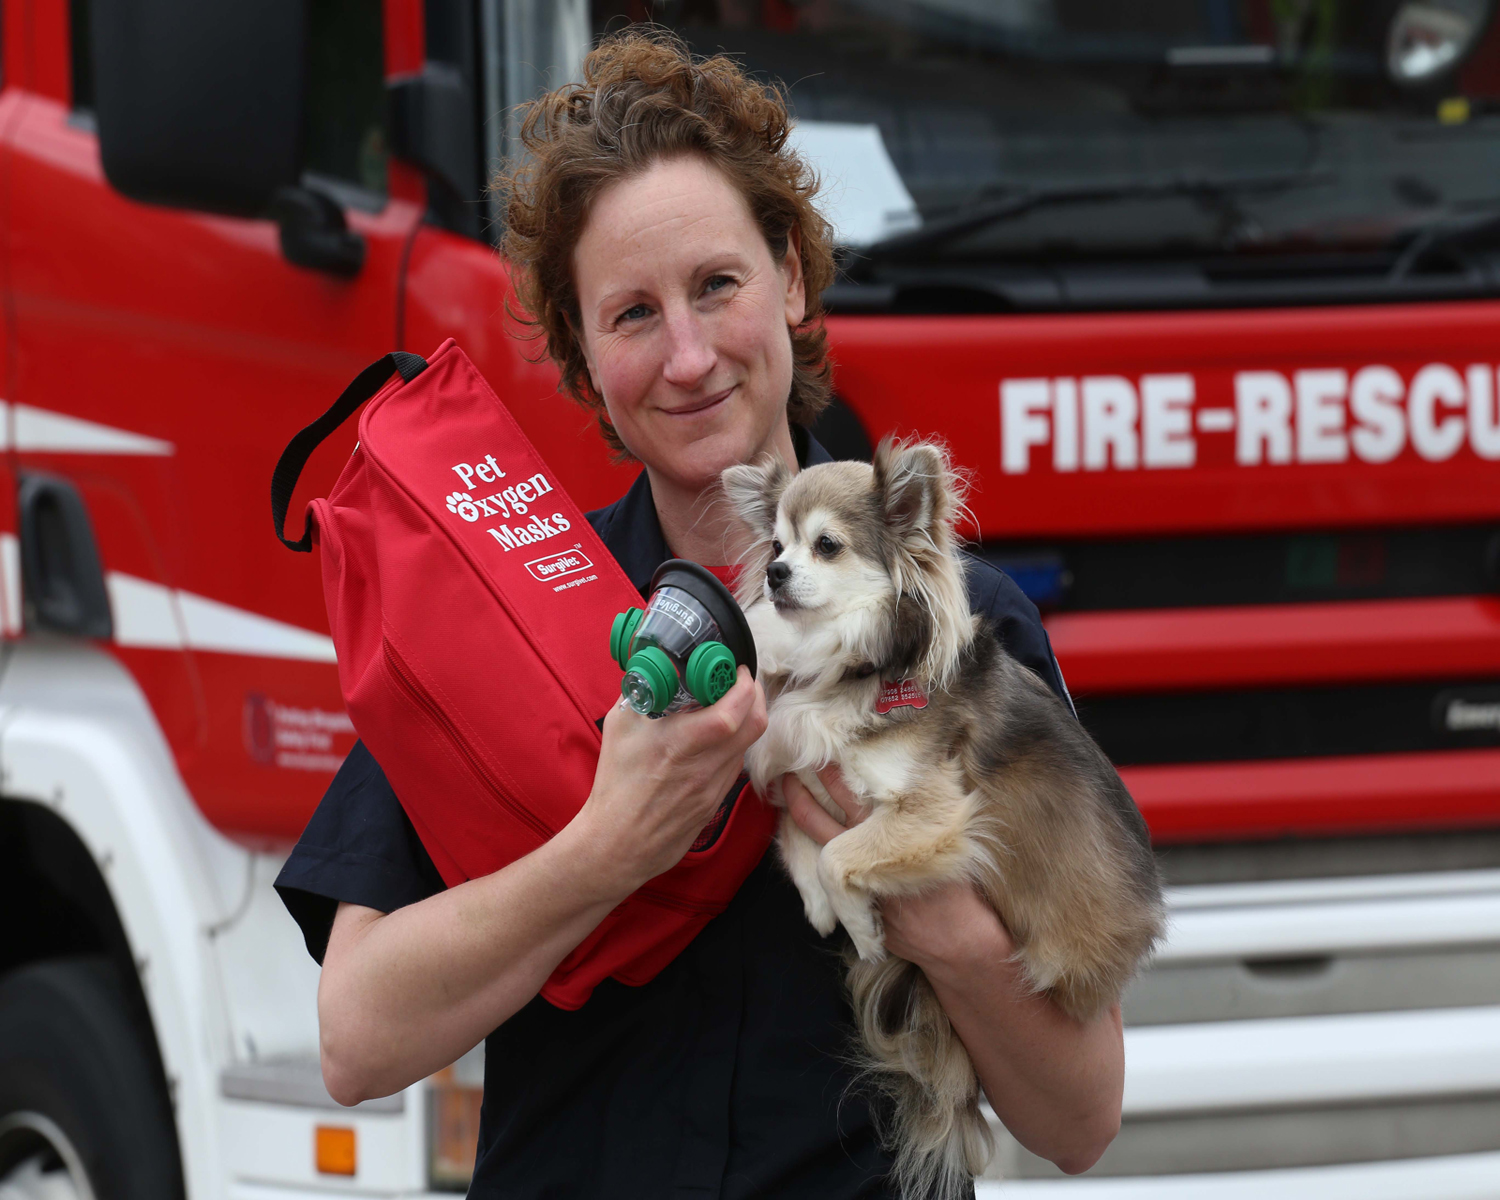 Telford firefighter Louise Fletcher with her pet Chihuahua, Cloud, raised funds to buy five of the masks.